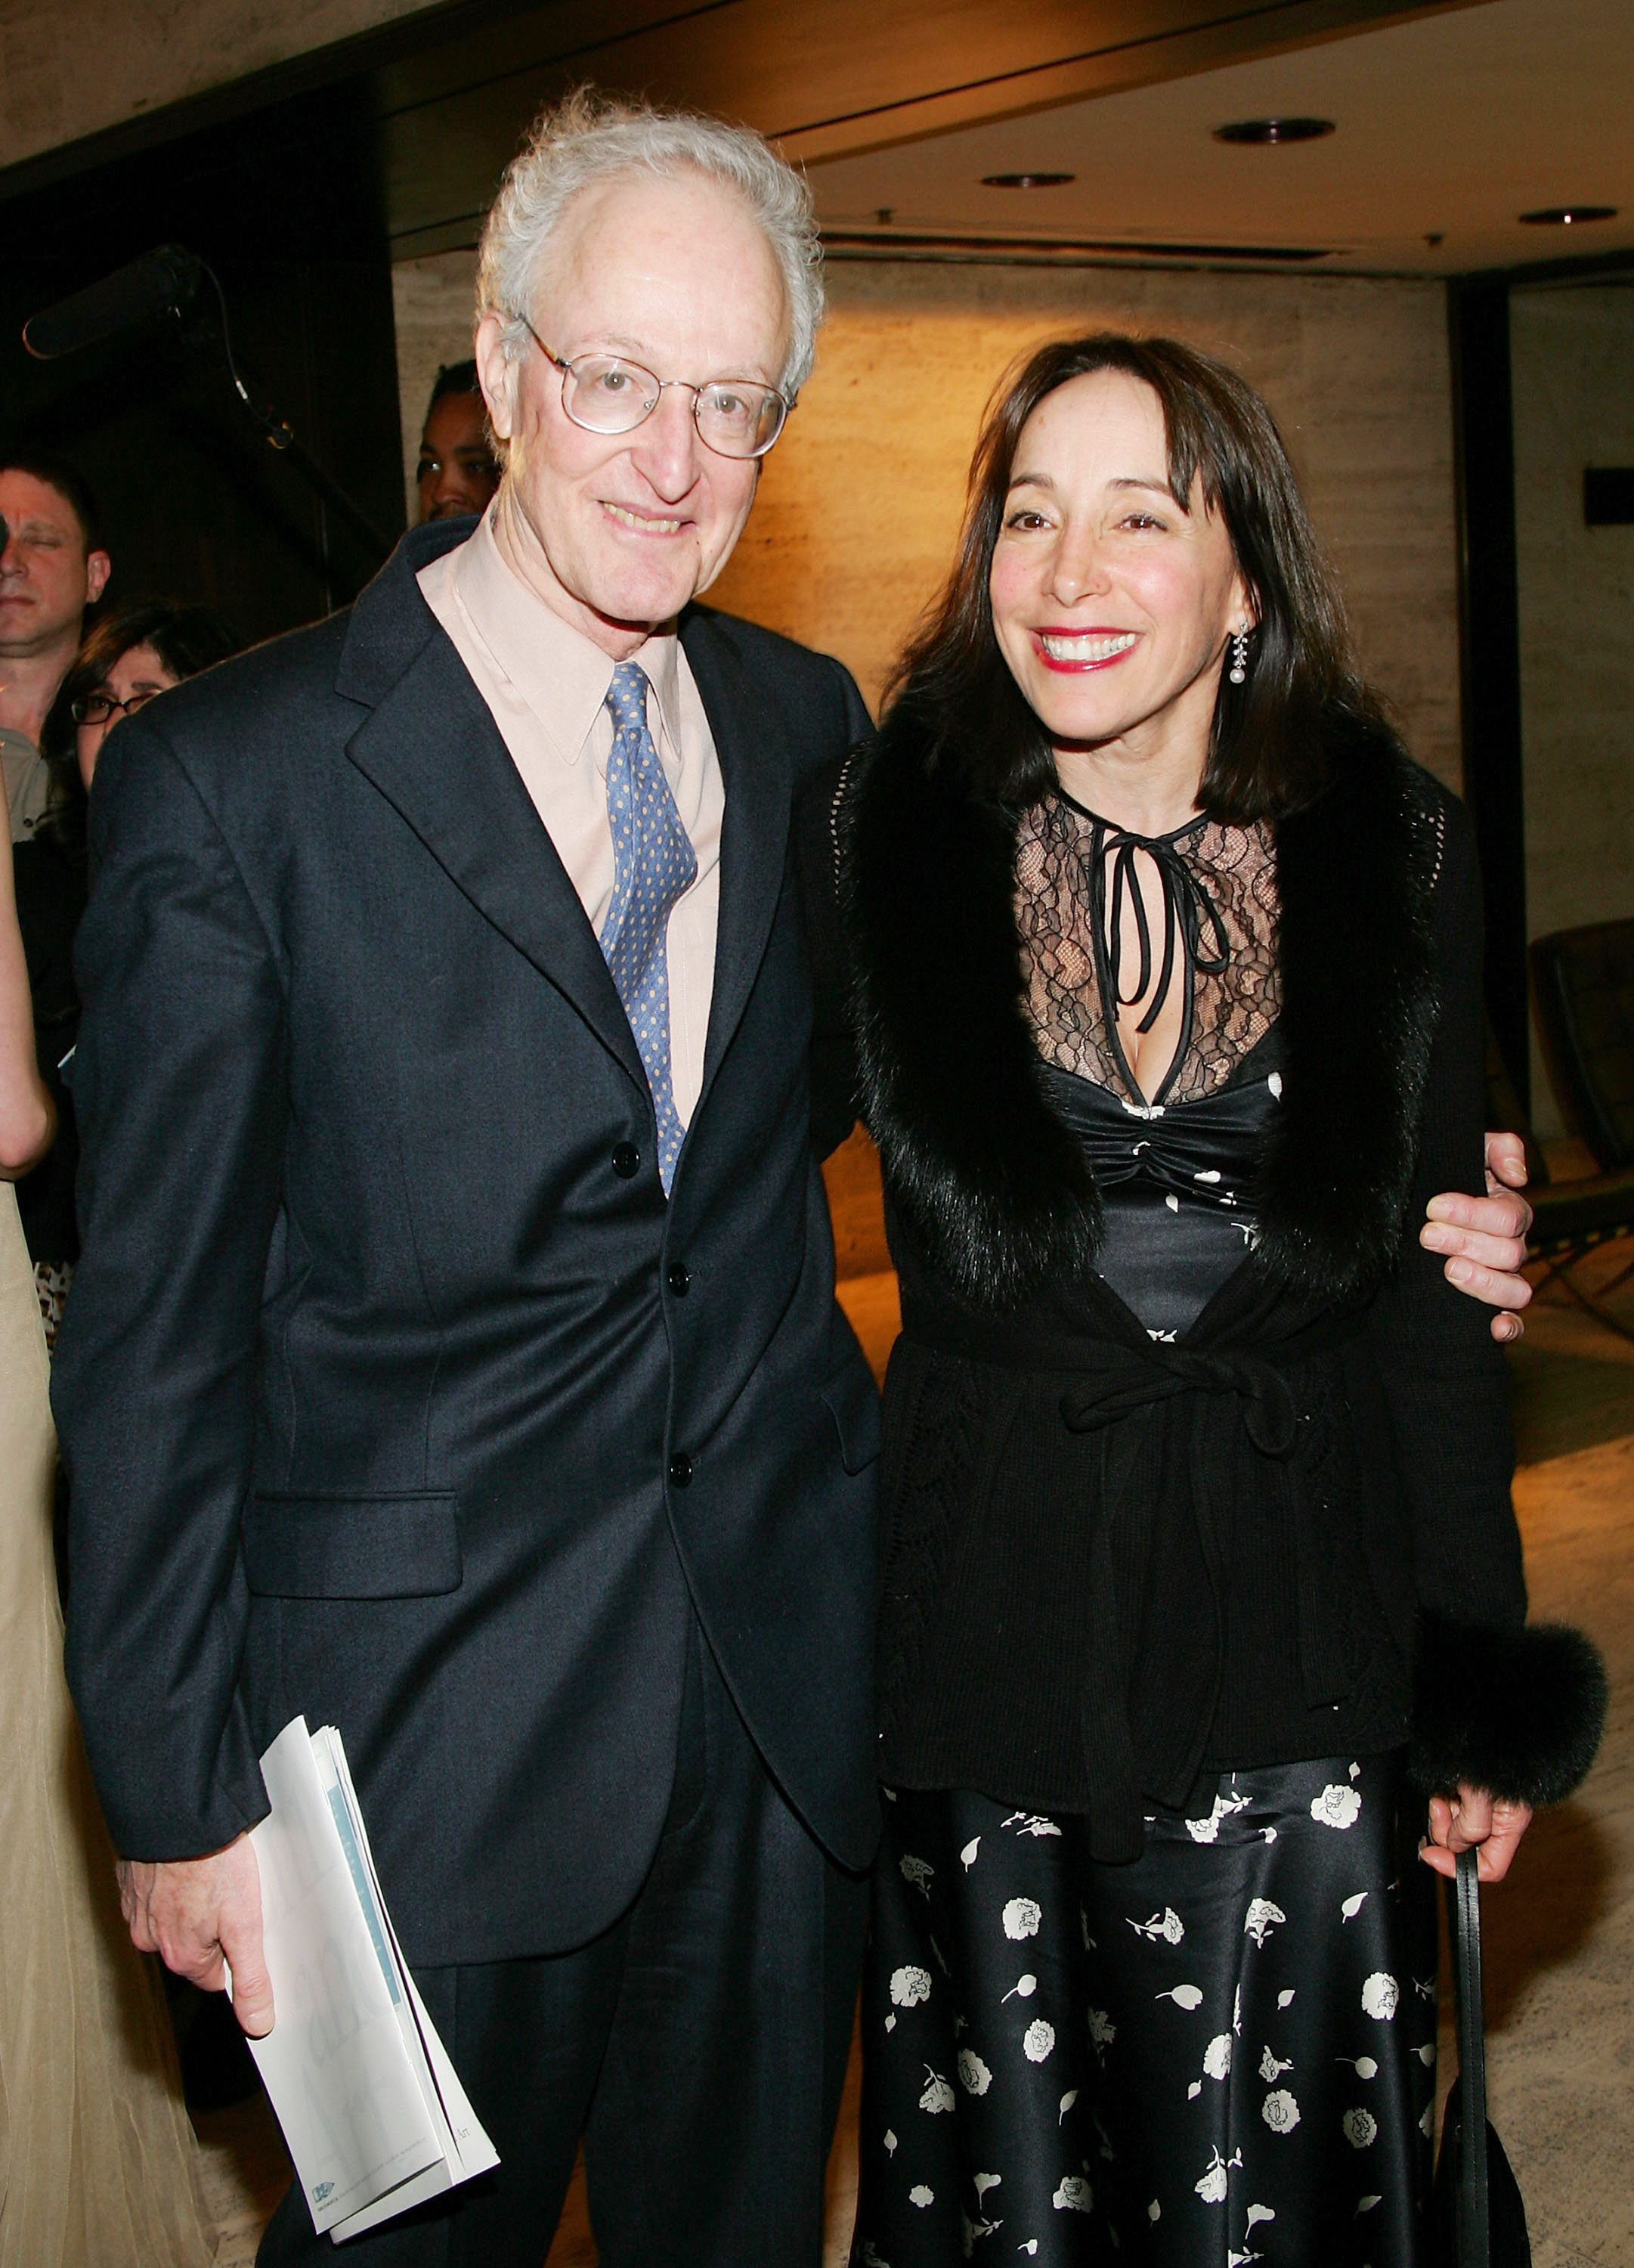 David Shire and his wife Didi Conn at the "Children and Art" post-show dinner on March 21, 2005, in New York City | Source: Getty Images